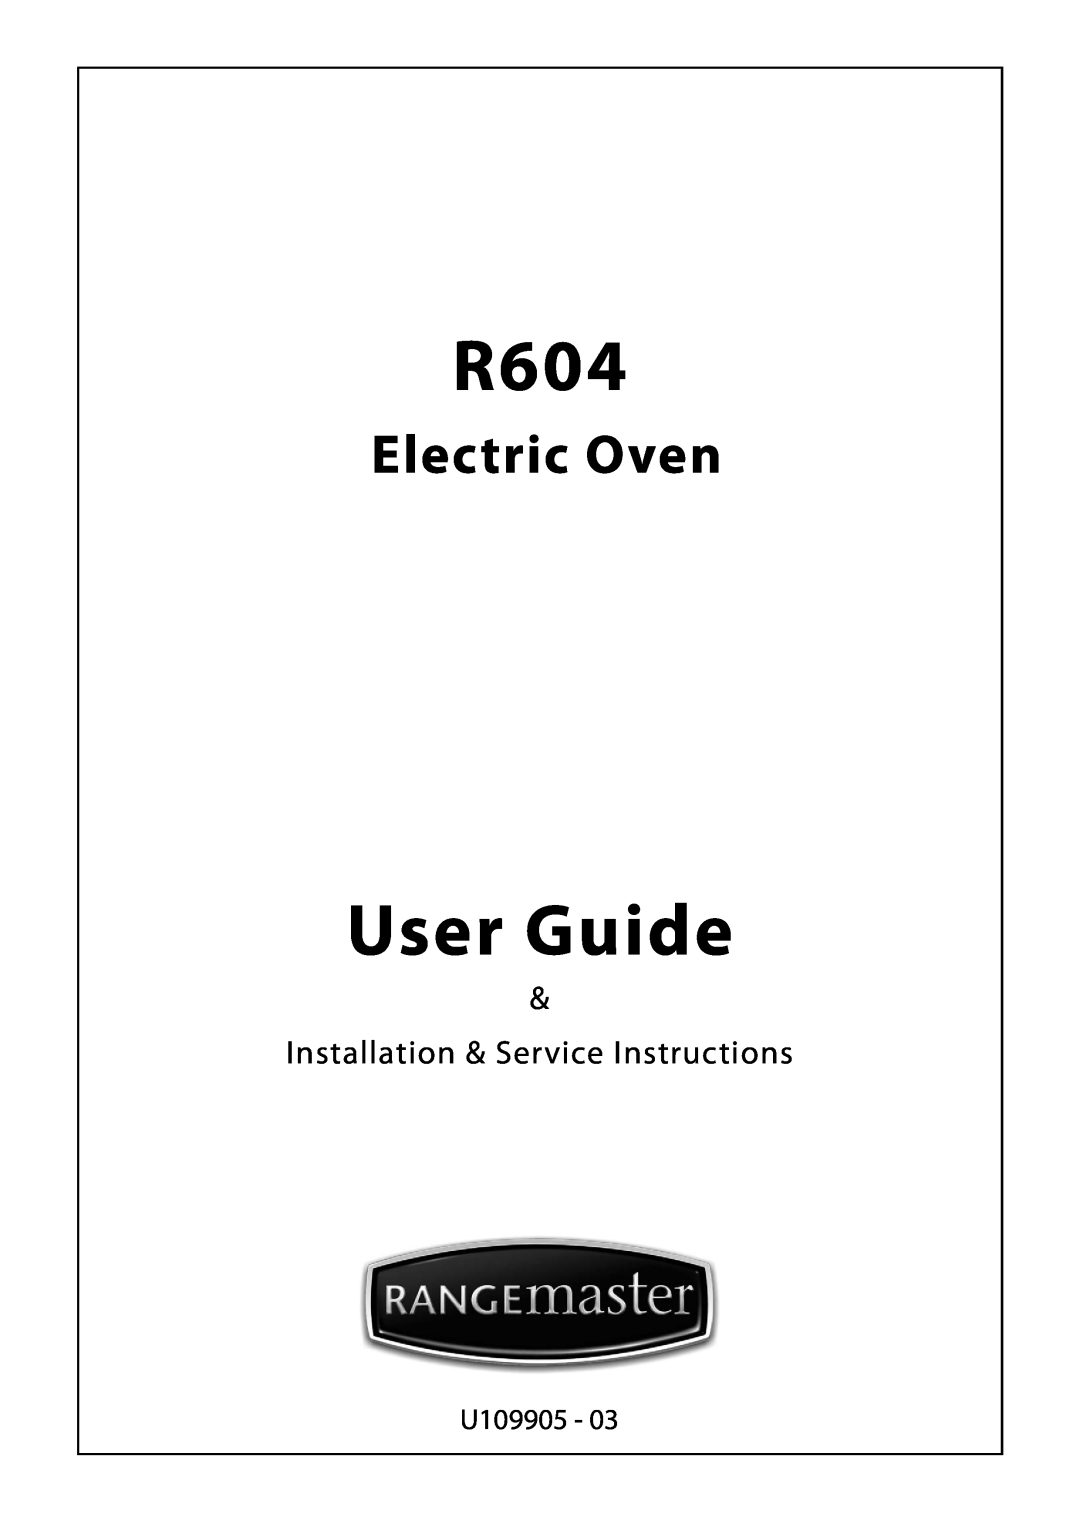 Rangemaster R604 manual User Guide, Electric Oven, Installation & Service Instructions, U109905 